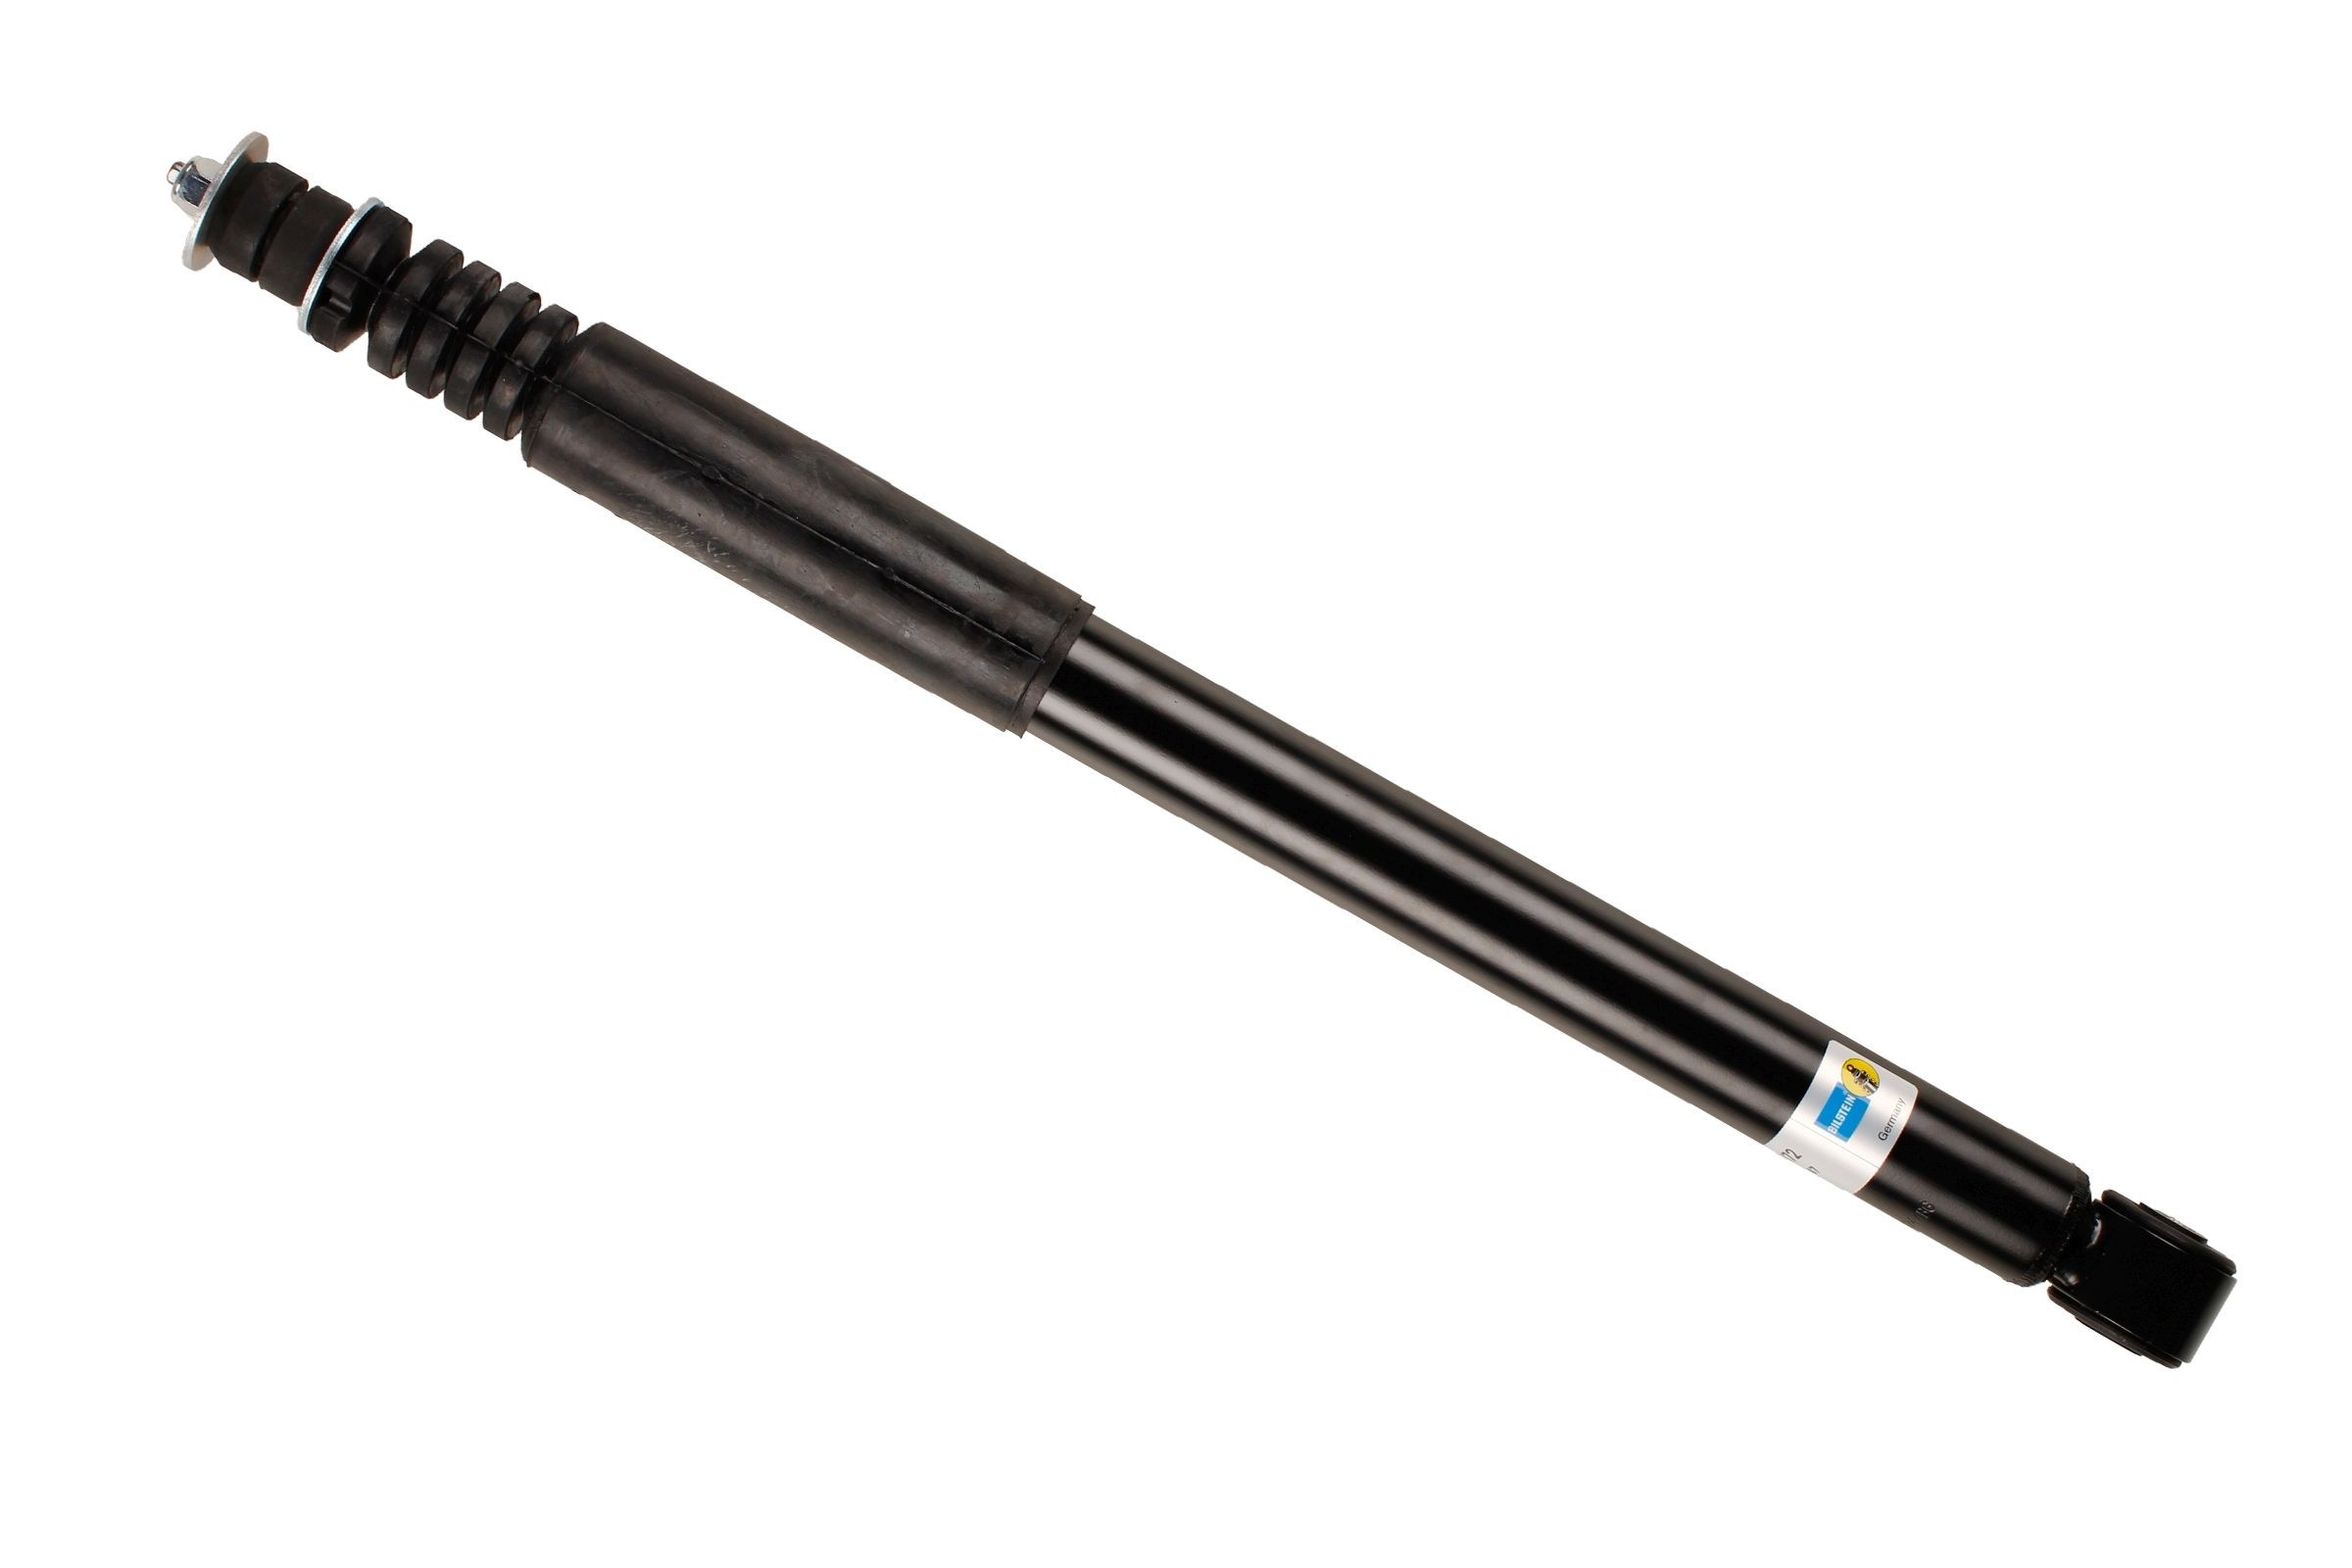 BILSTEIN - B4 OE Replacement 19-122472 Shock absorber Rear Axle, Gas Pressure, Twin-Tube, Absorber does not carry a spring, Bottom eye, Top pin